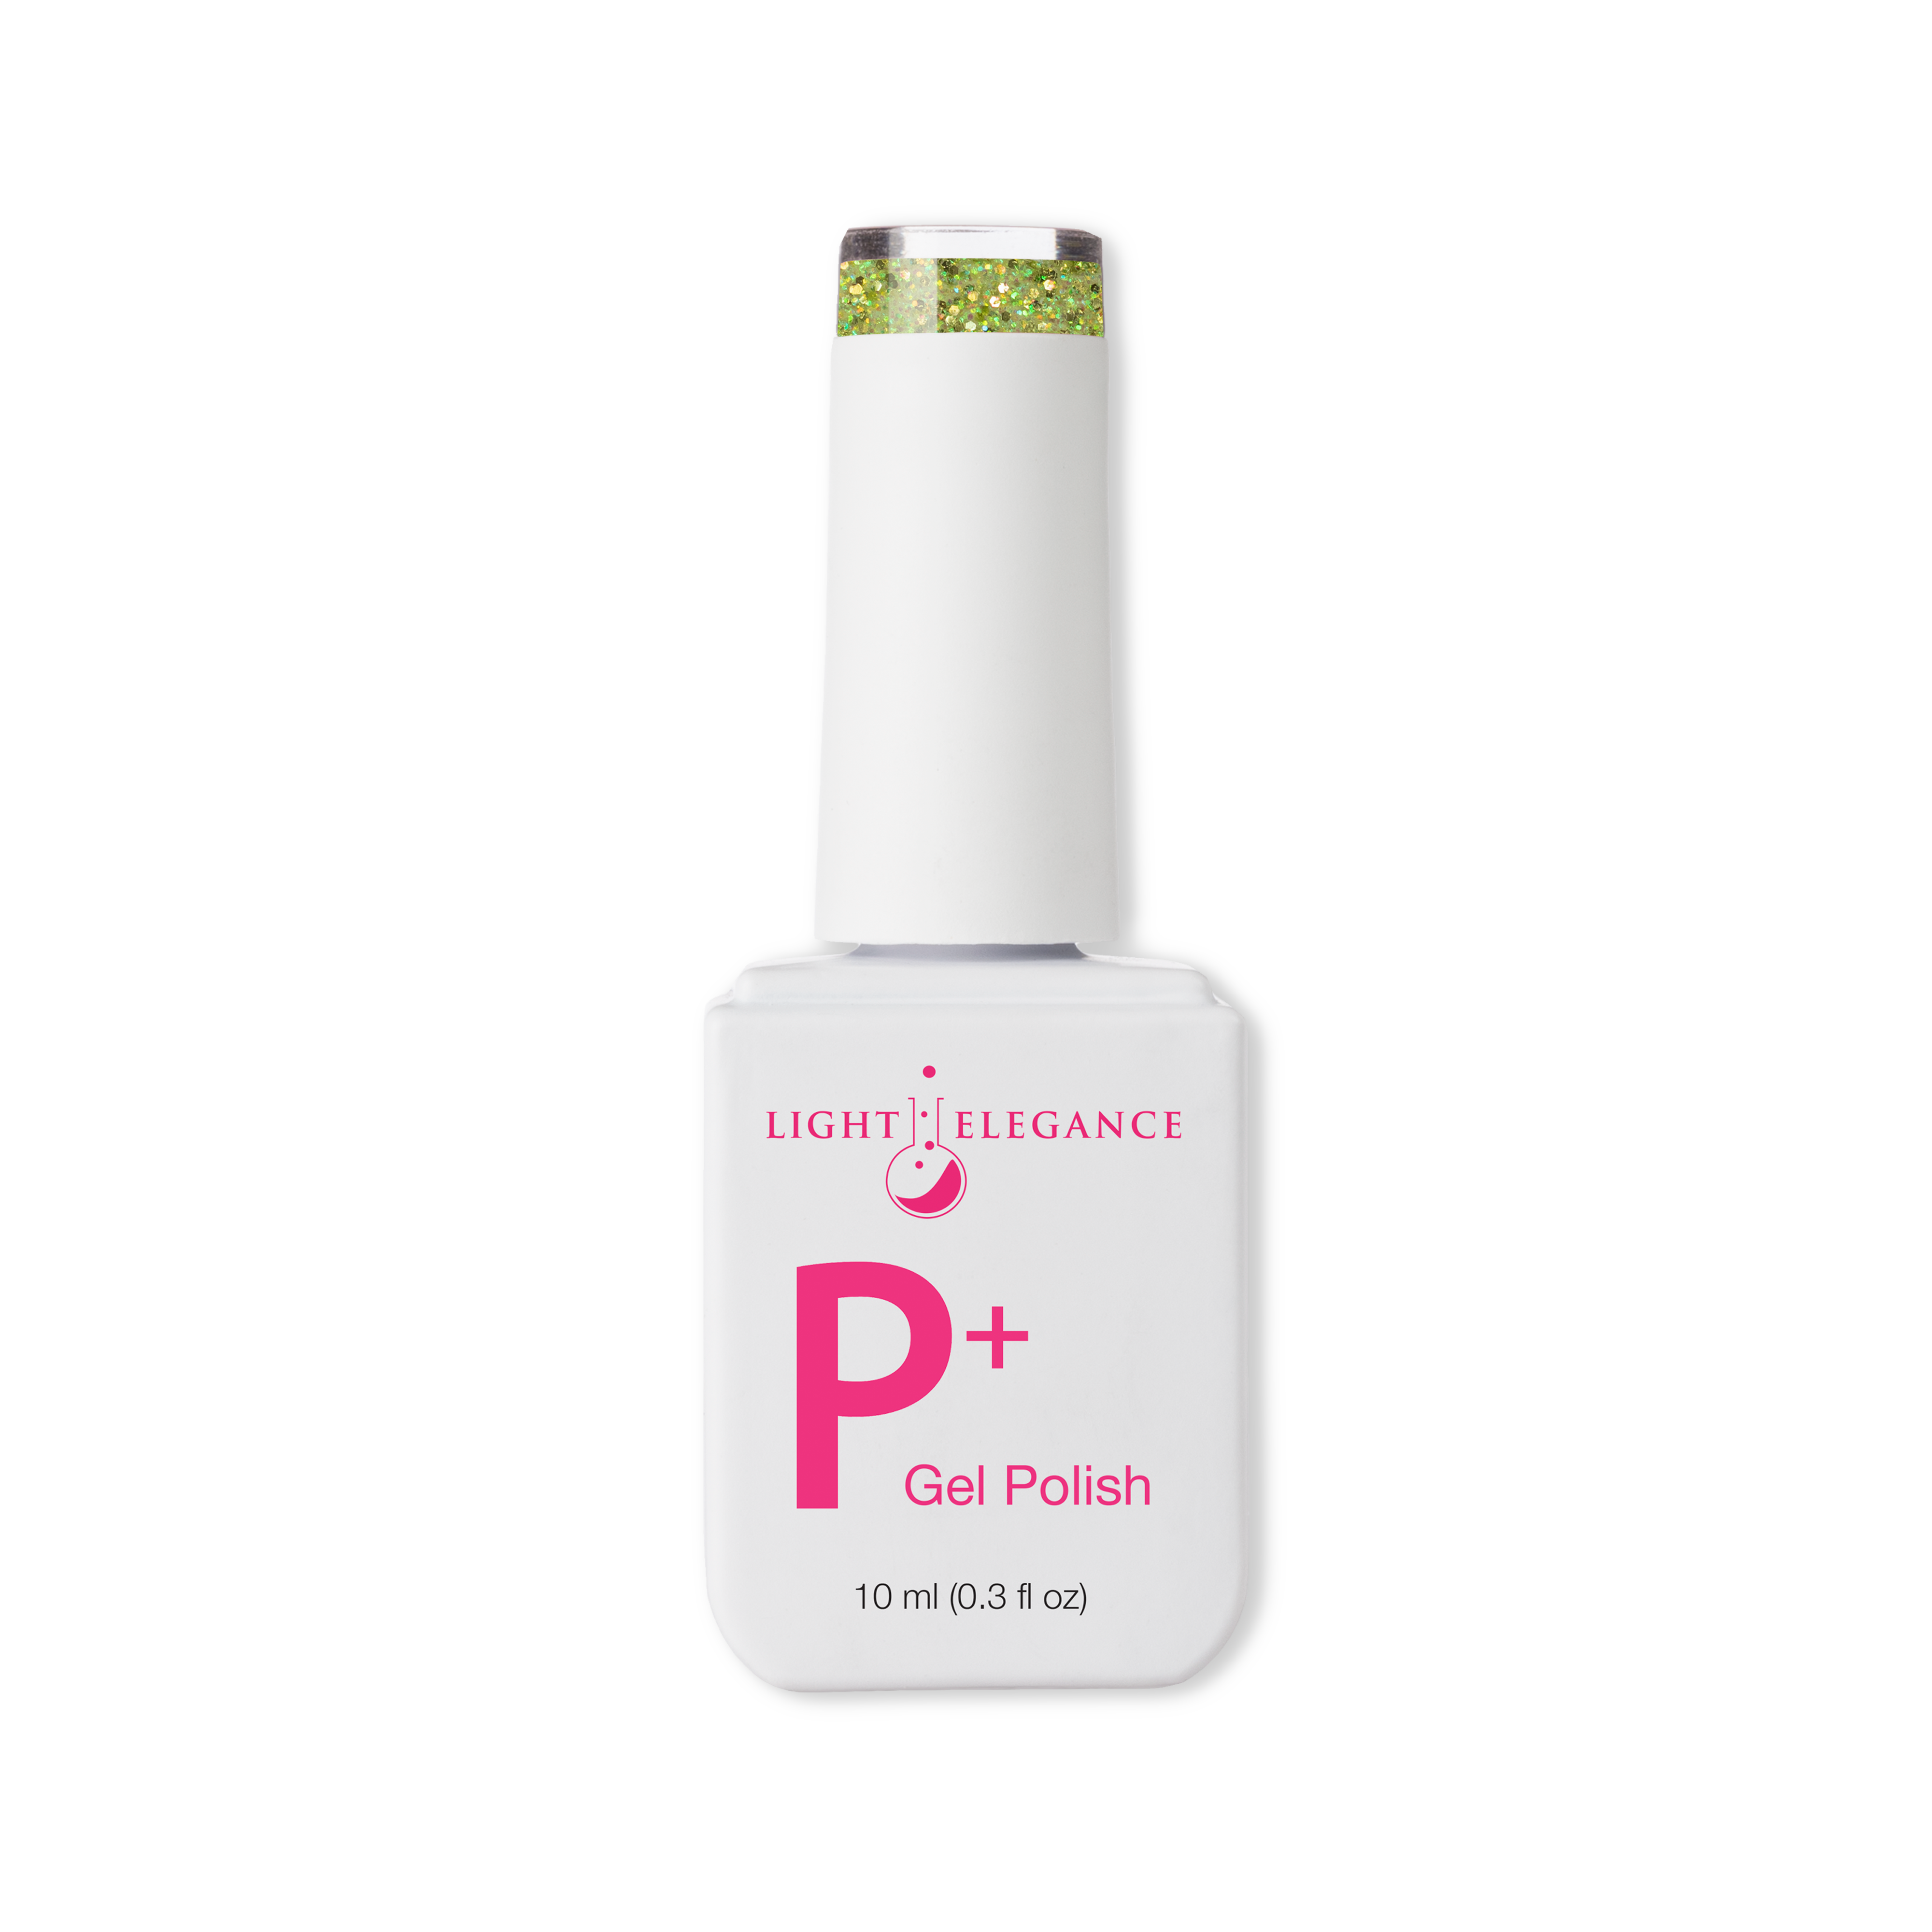 Light Elegance P+ Soak Off Glitter Gel - Peace and Love :: New Packaging - Creata Beauty - Professional Beauty Products